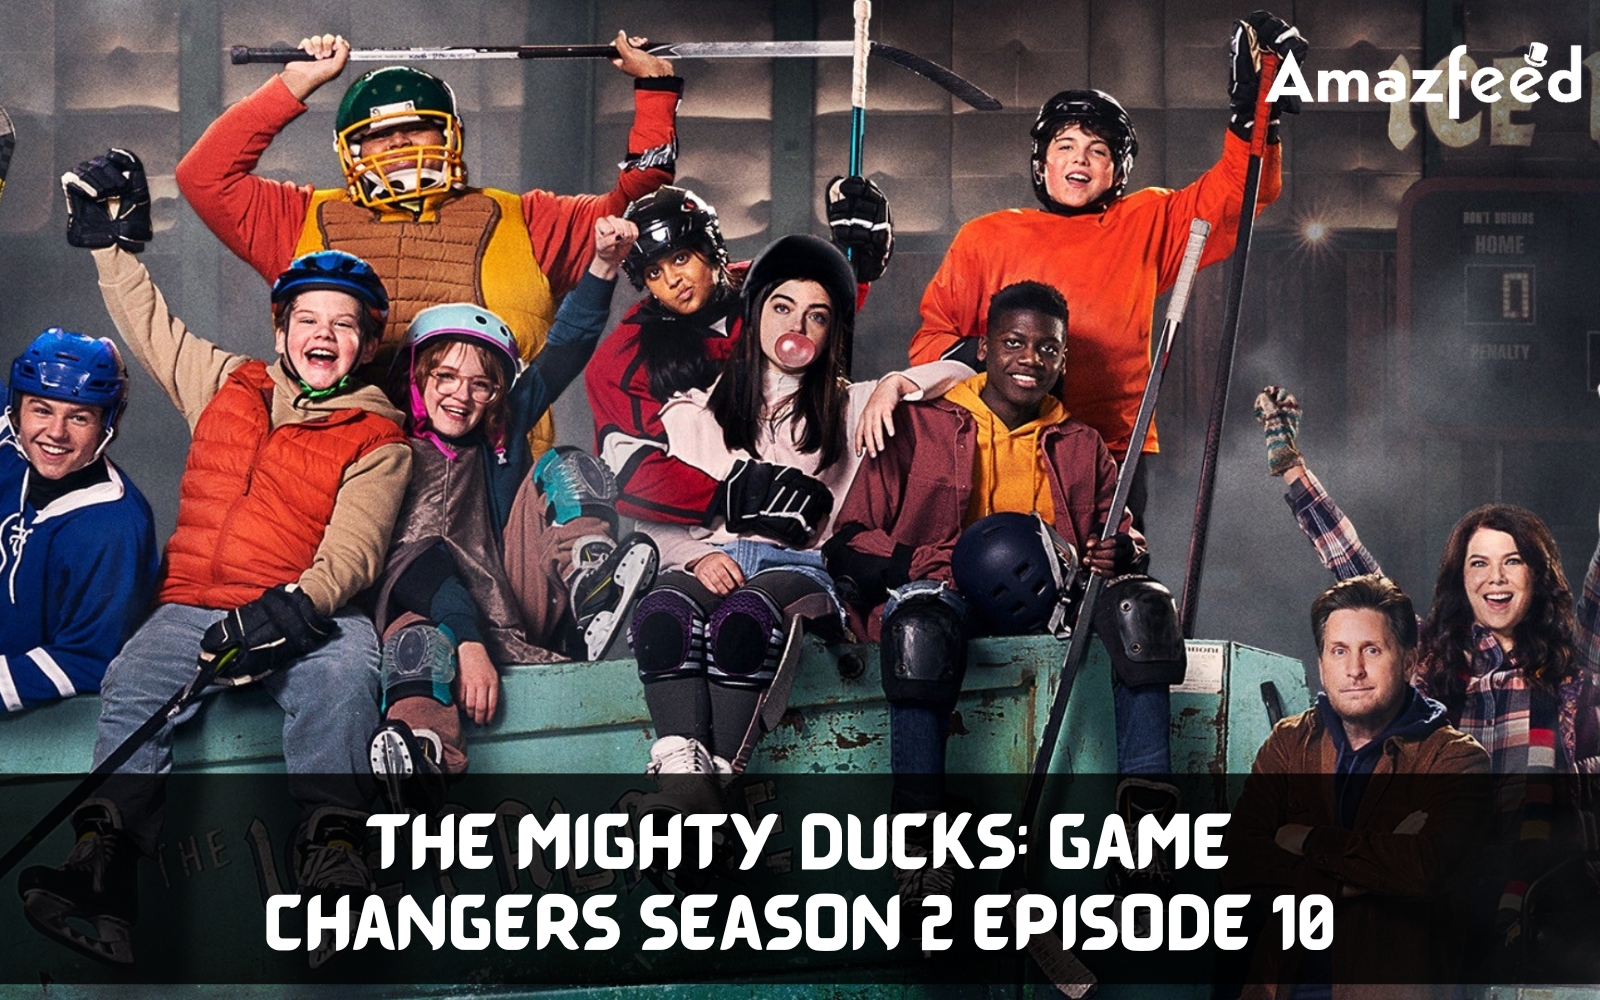 The Mighty Ducks Game Changers season 2 Episode 10